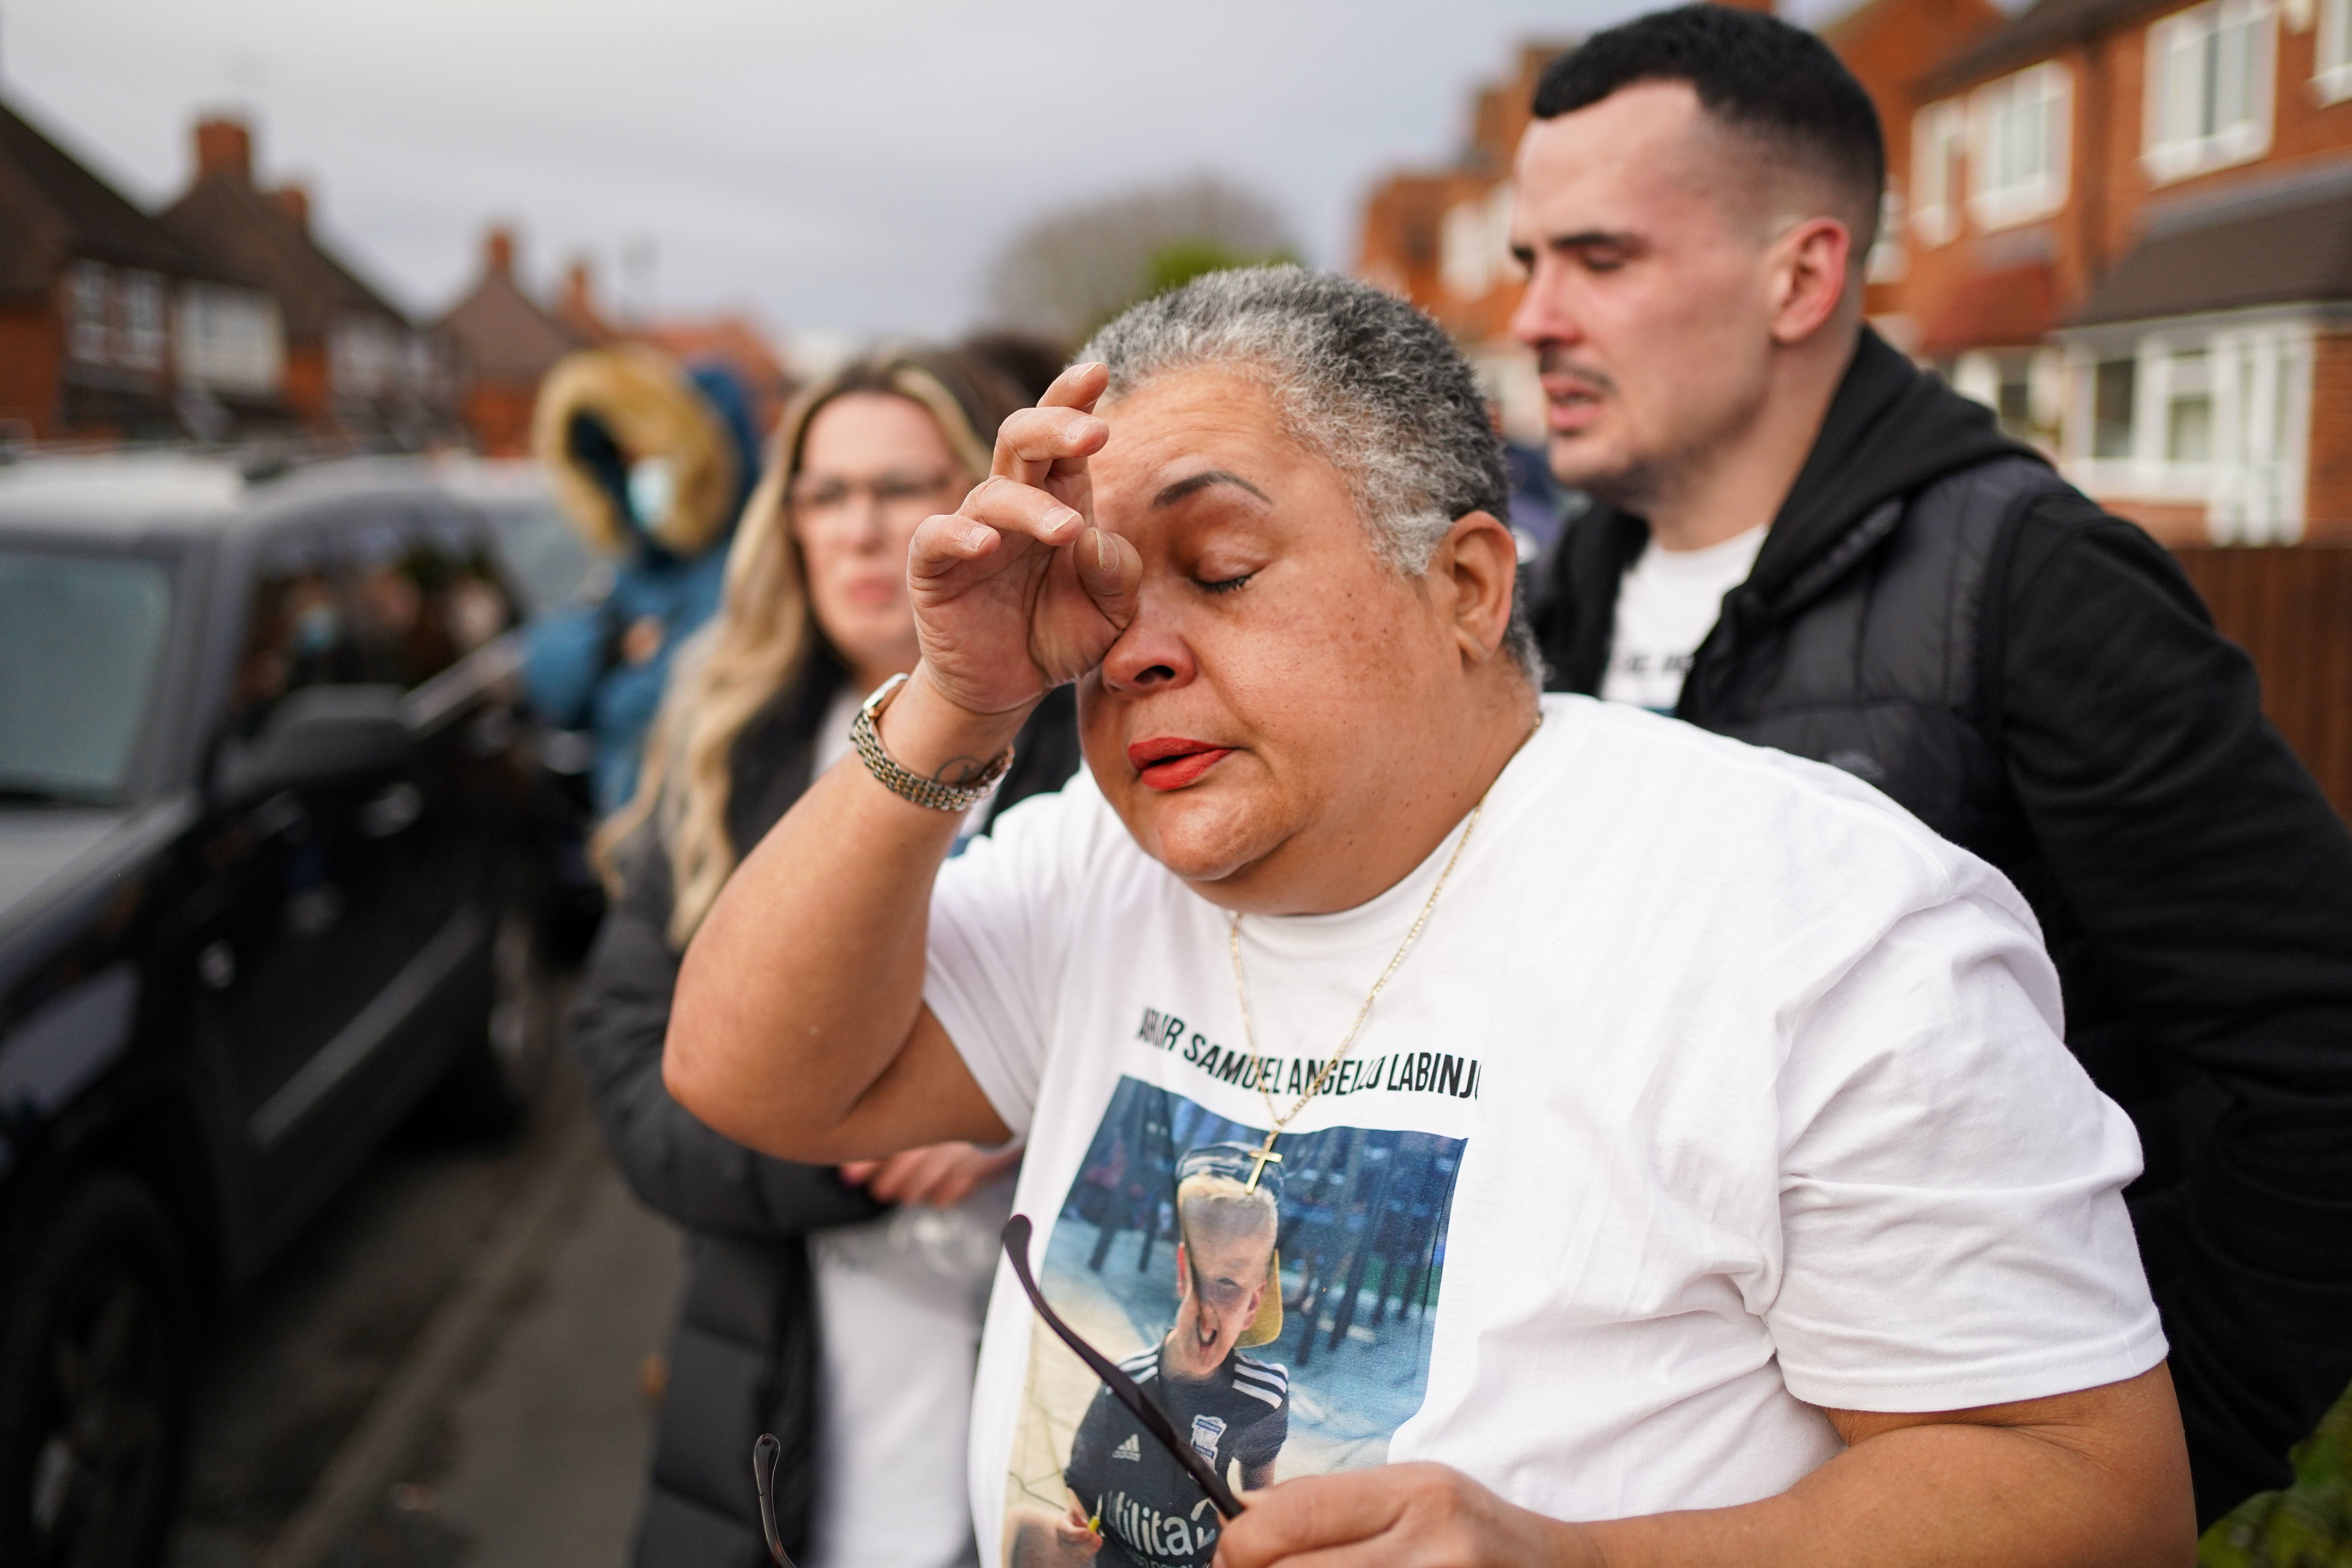 Madeleine Halcrow was among a large crowd of people at a vigil (Jacob King/PA)